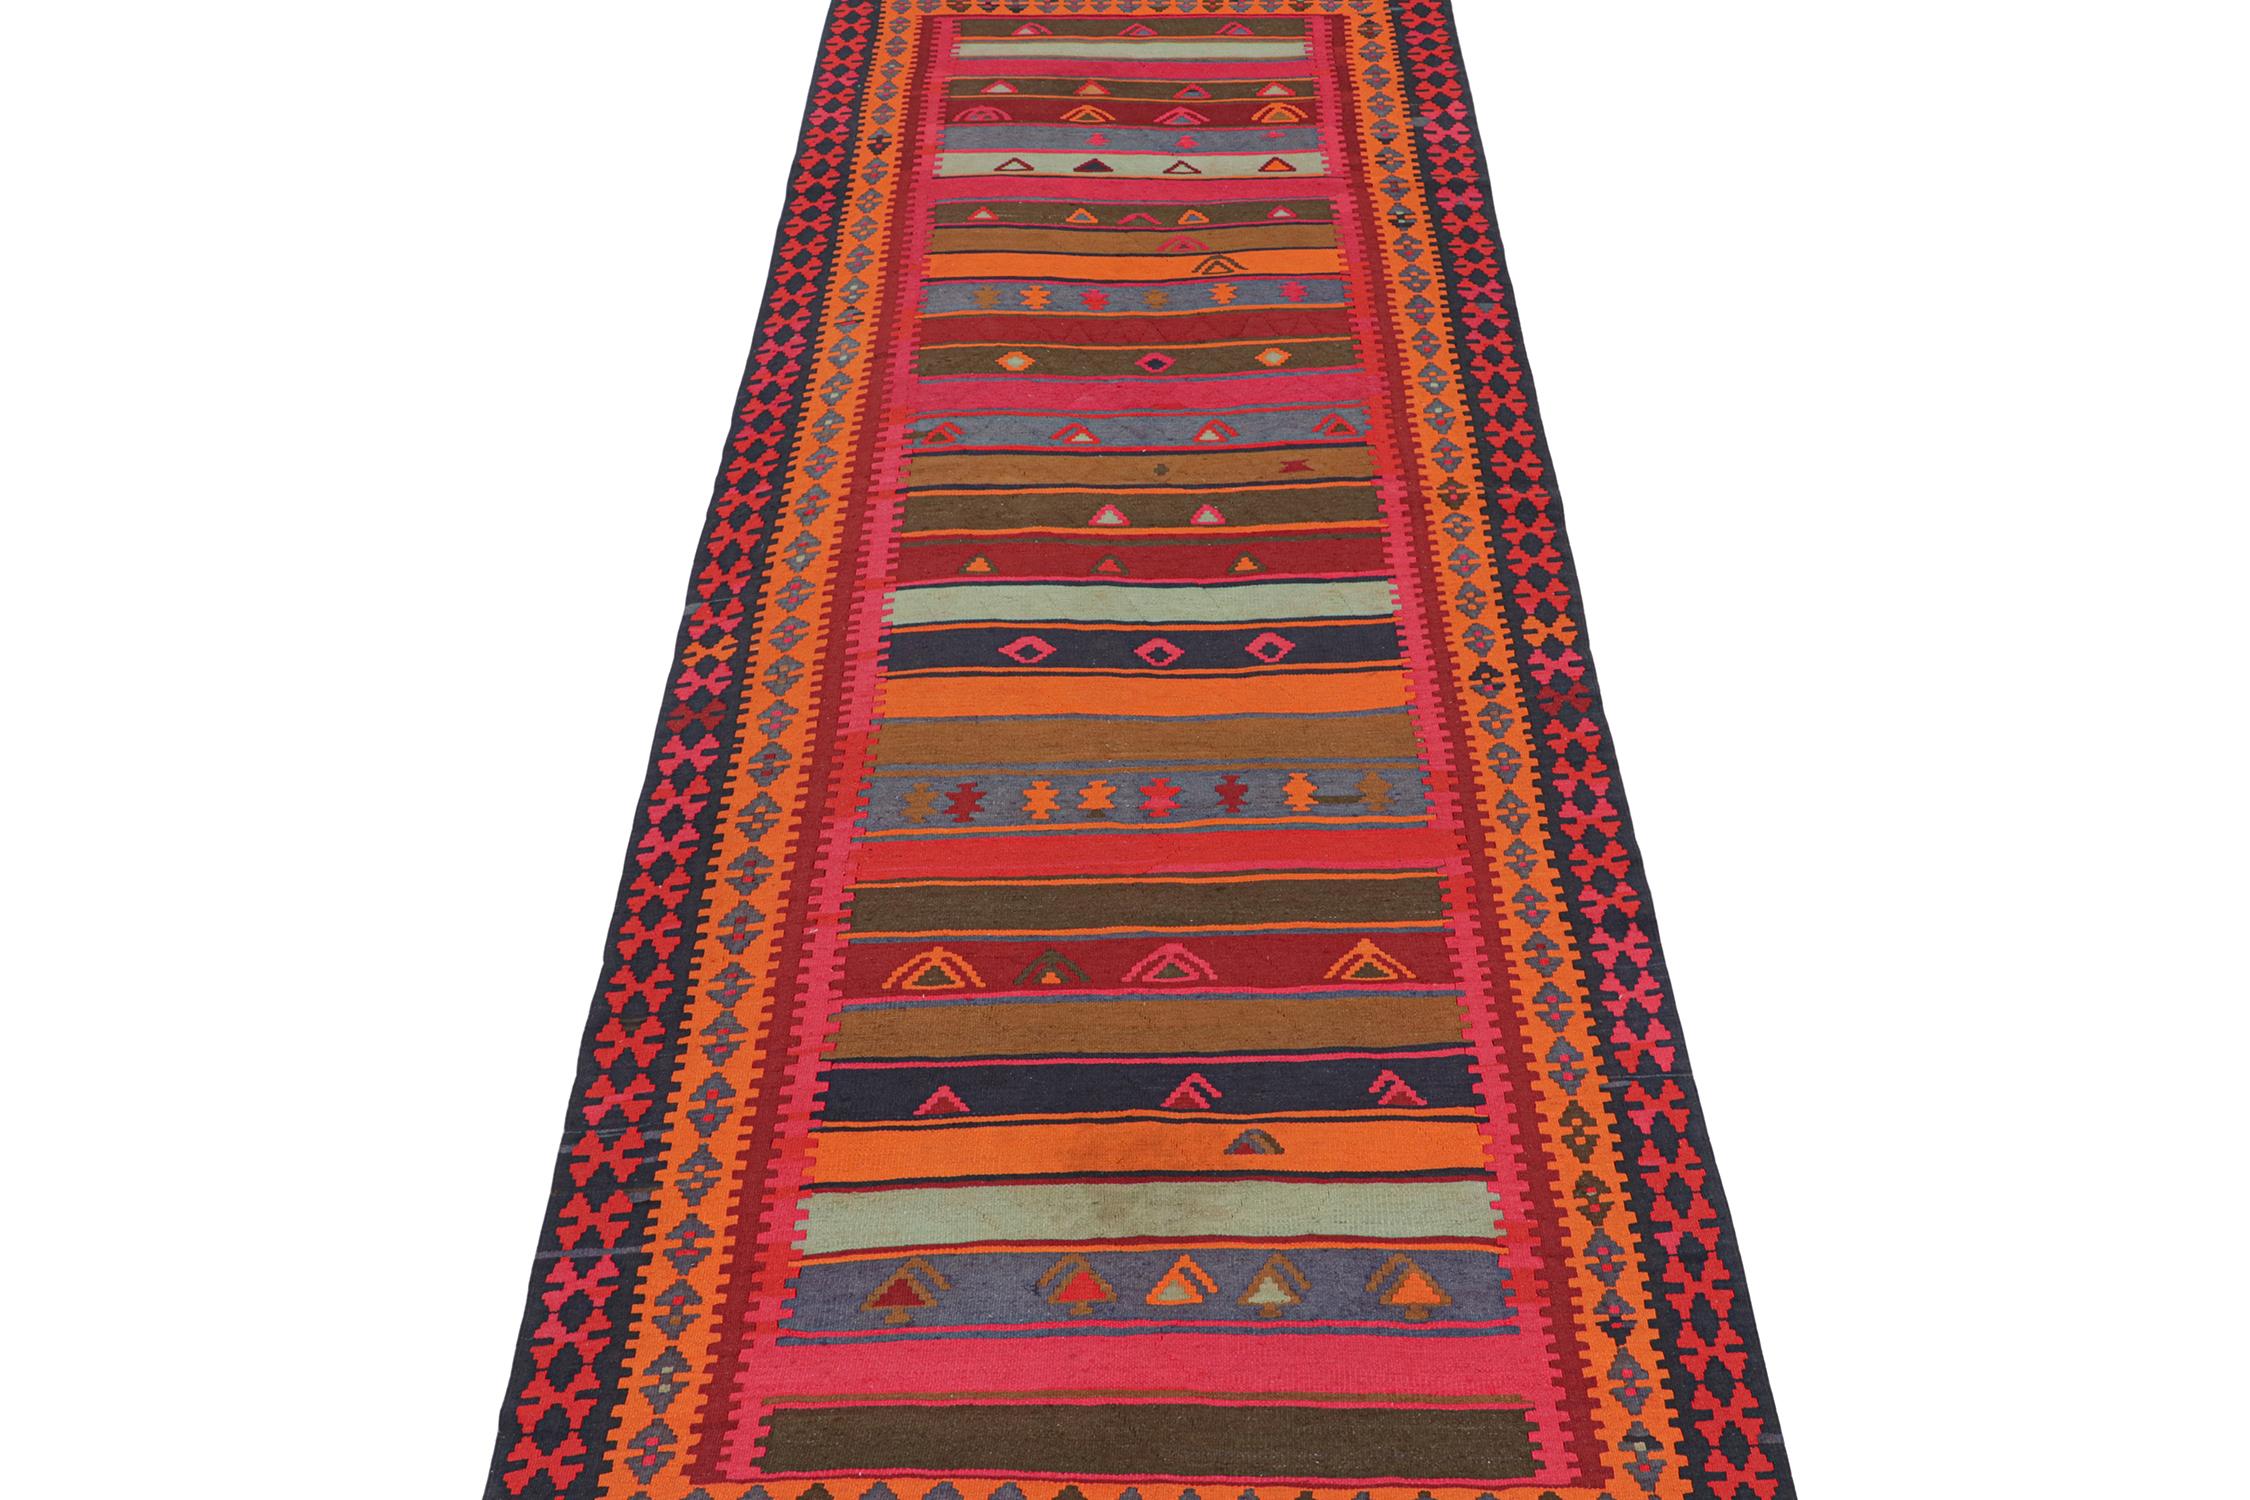 This vintage 5x14 Persian Kilim is handwoven in wool and originates circa 1950-1960. This Kilim is believed to hail from Meshkin—a small village known for its craft among what connoisseurs call 